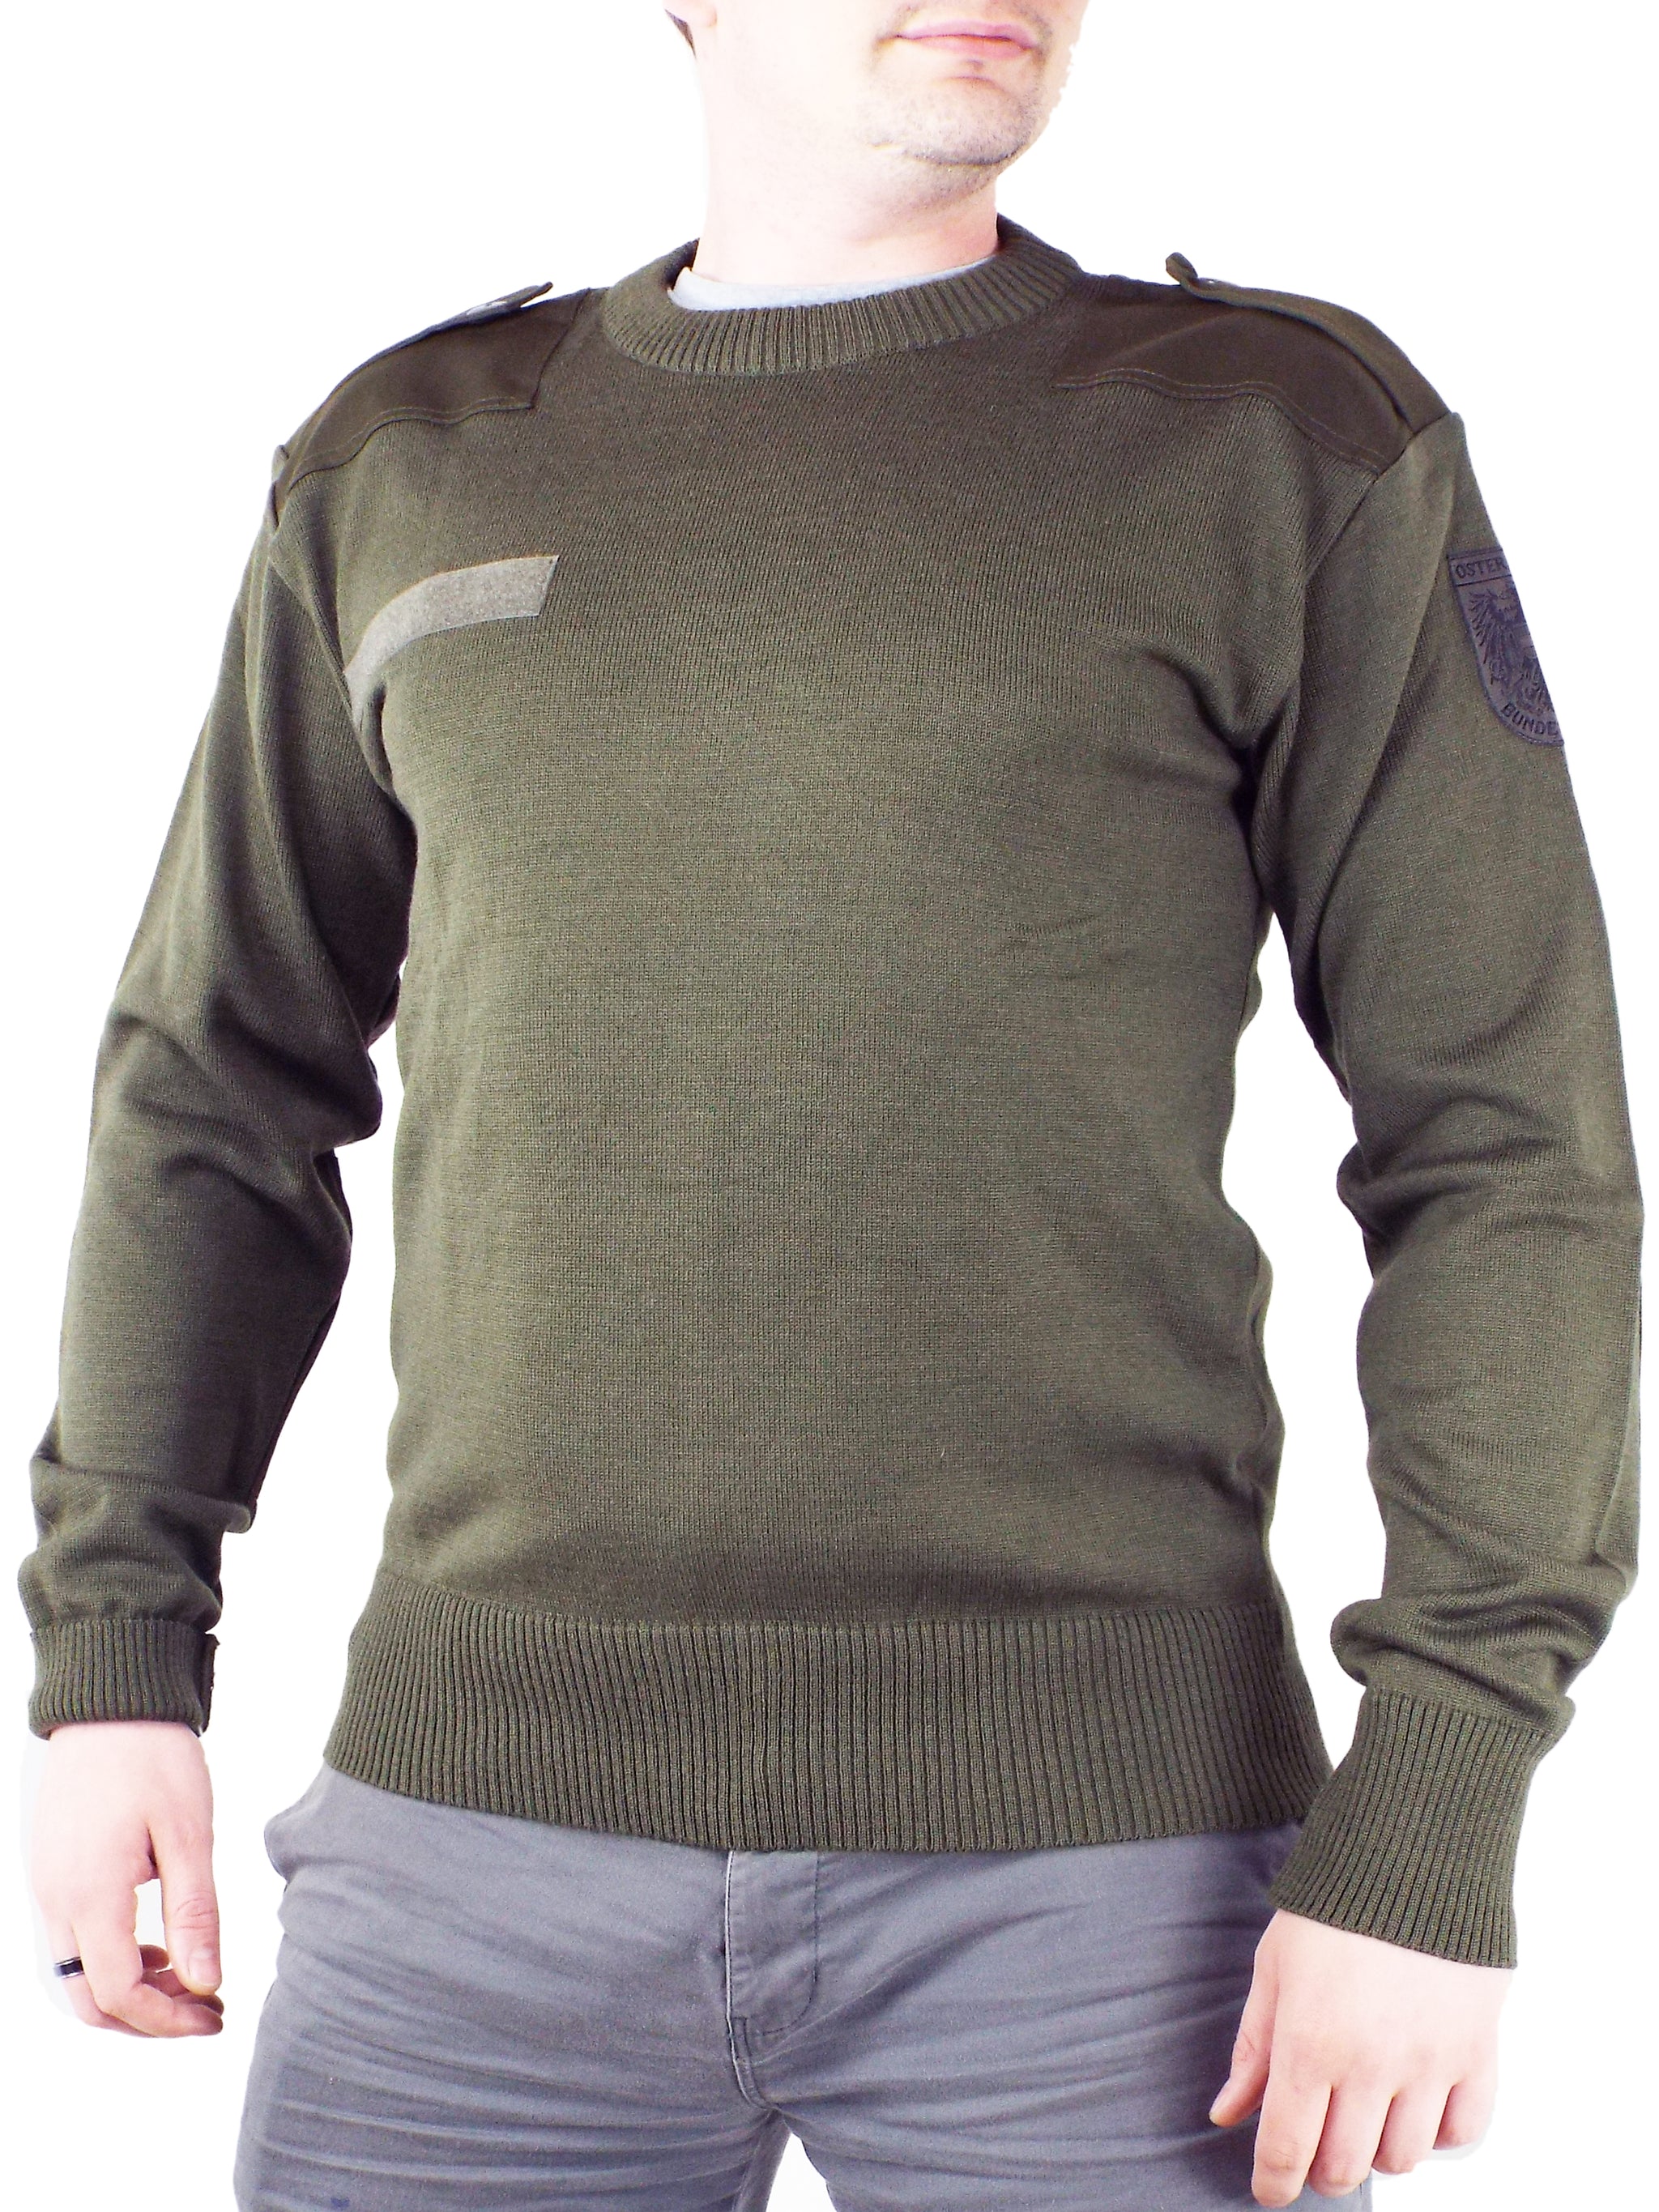 Austrian Army Olive Green Jumper - Unissued - Forces Uniform and Kit